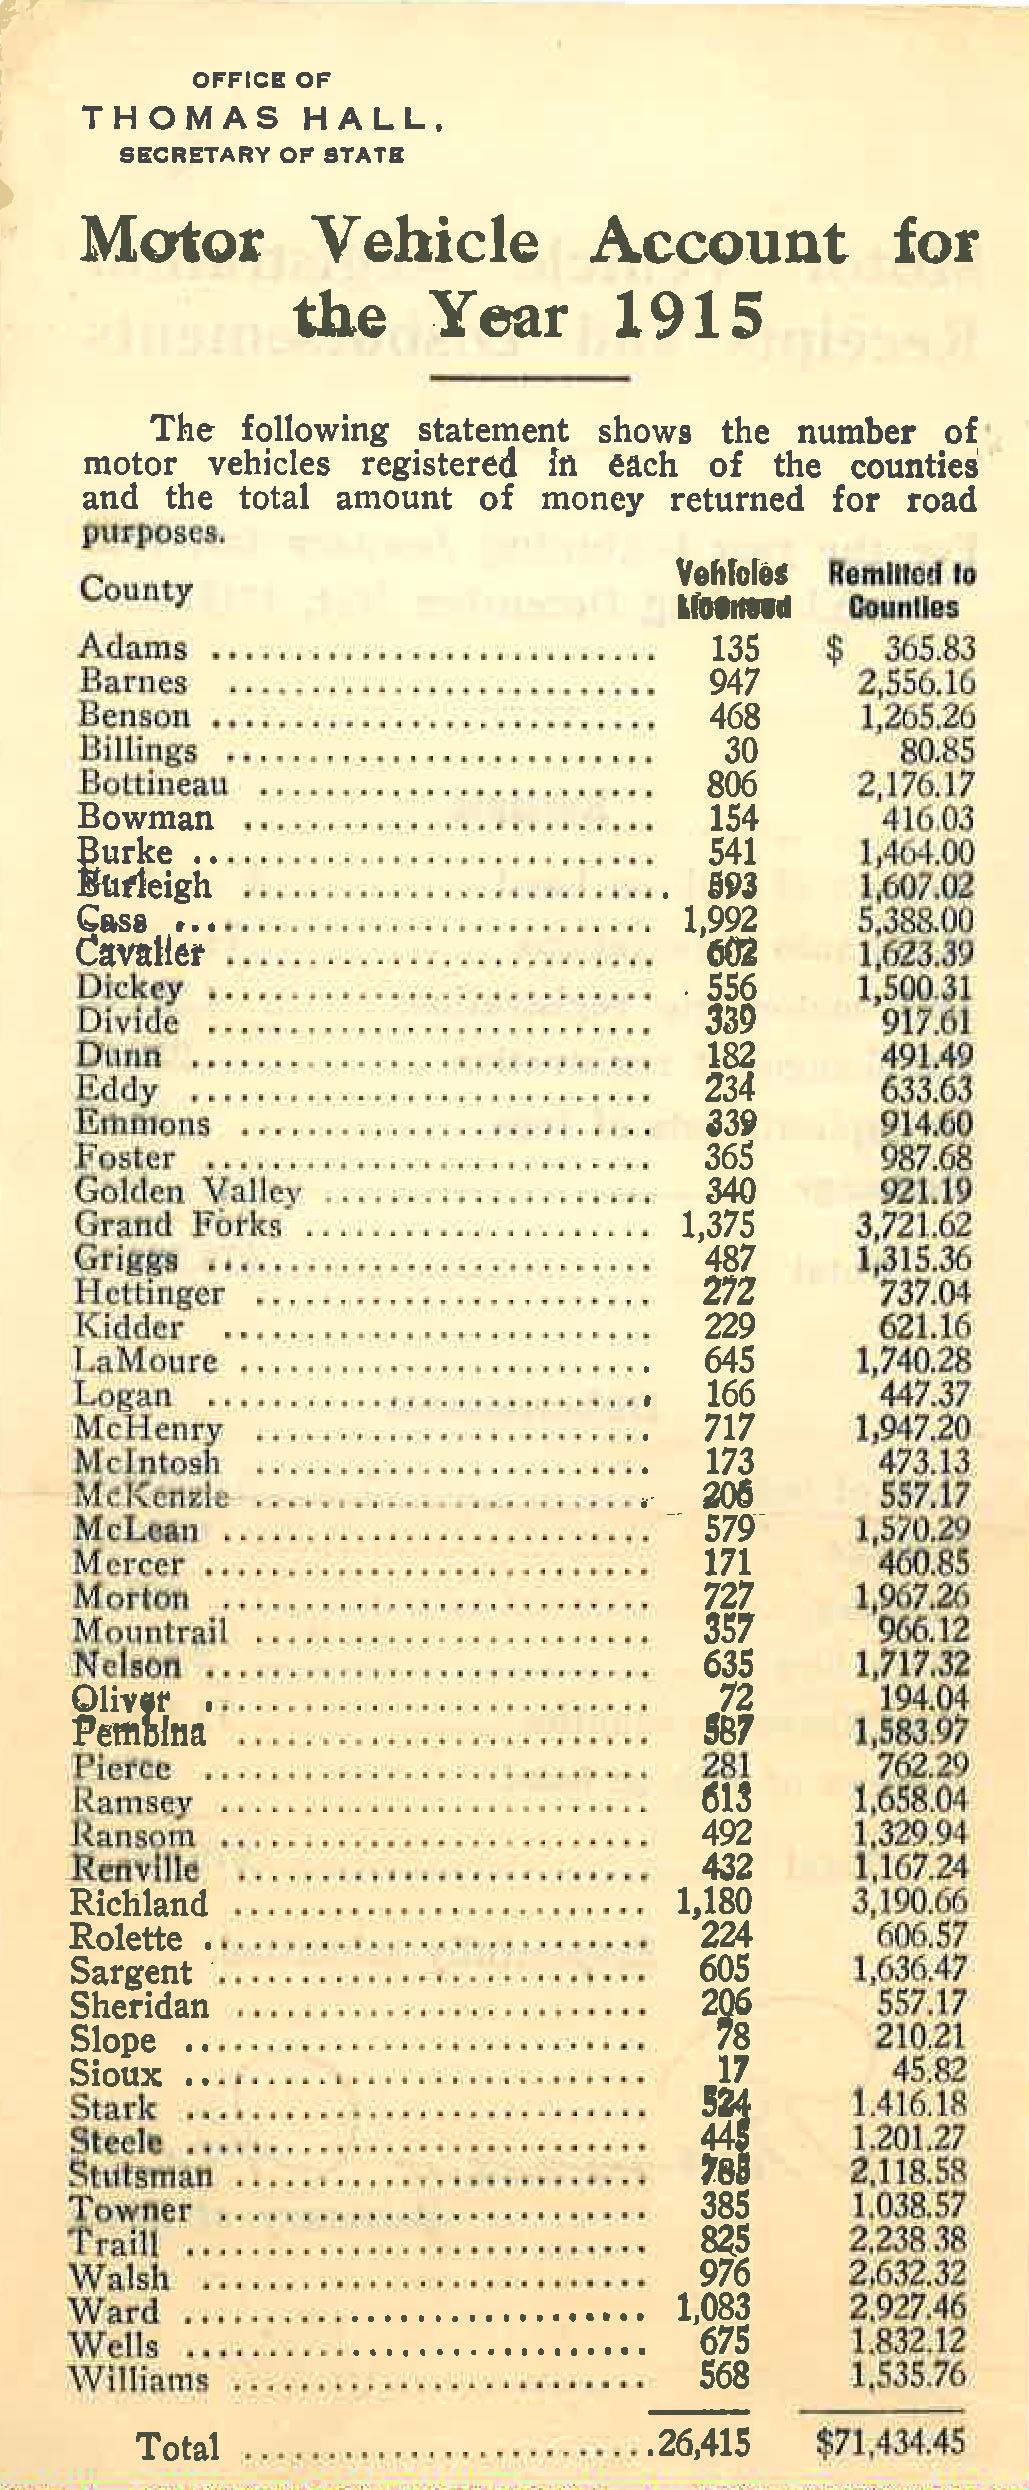 When the state began to license automobiles in 1911, the money paid to the state was divided with the counties. Counties used the money to build and maintain roads and bridges.